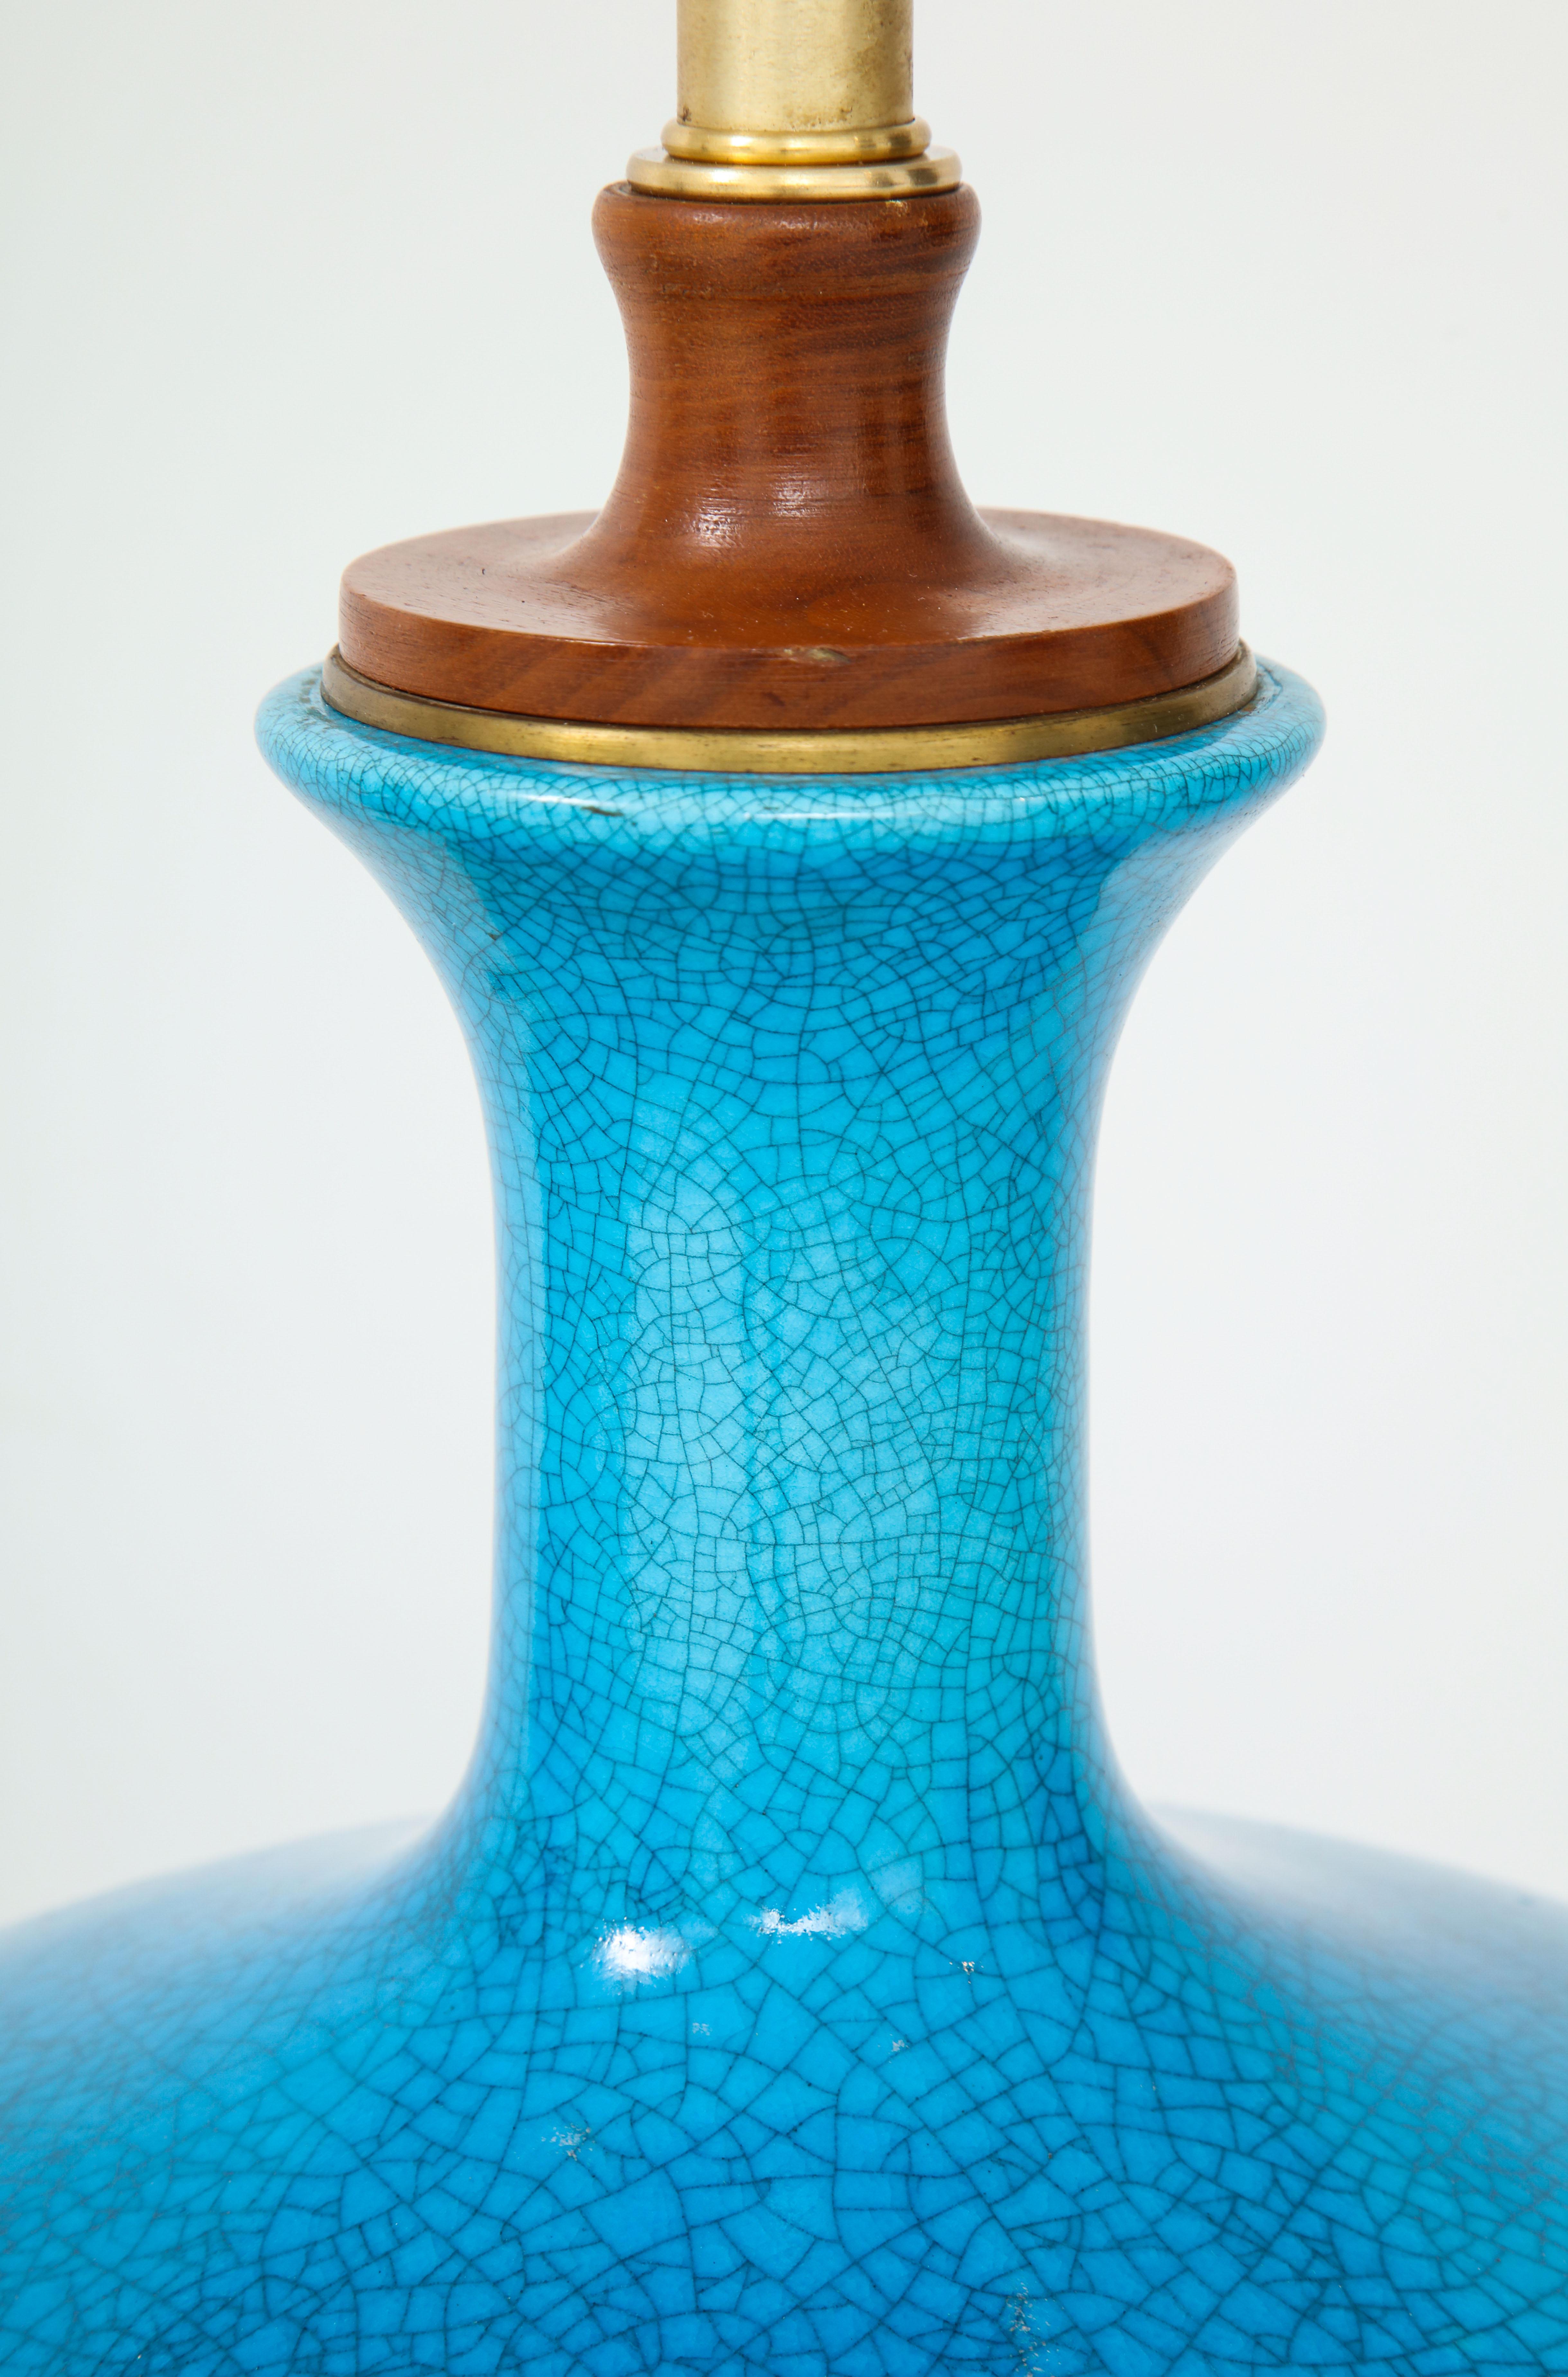 Ceramic Fabulous Pair of Mid-Century Lamps with a Cerulean Blue Glazed Finish